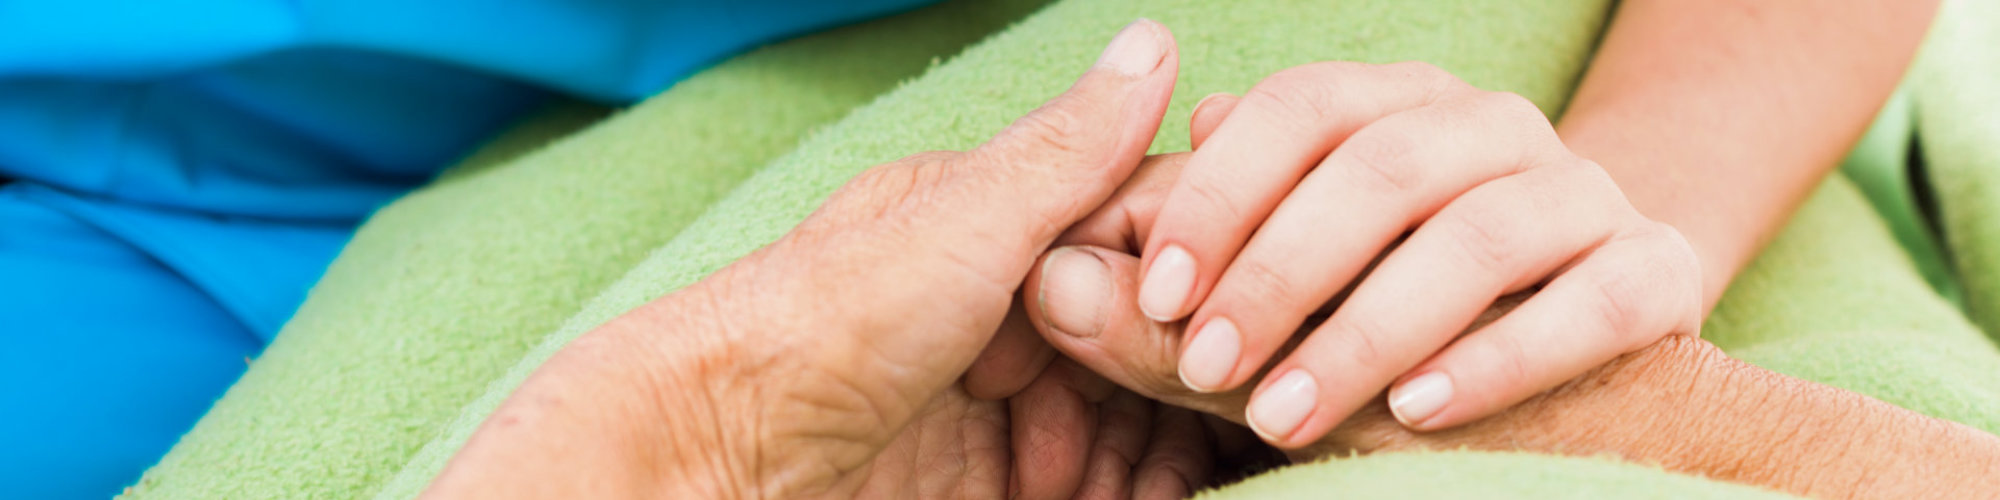 Social services nurse holding elderly woman's hand with care.